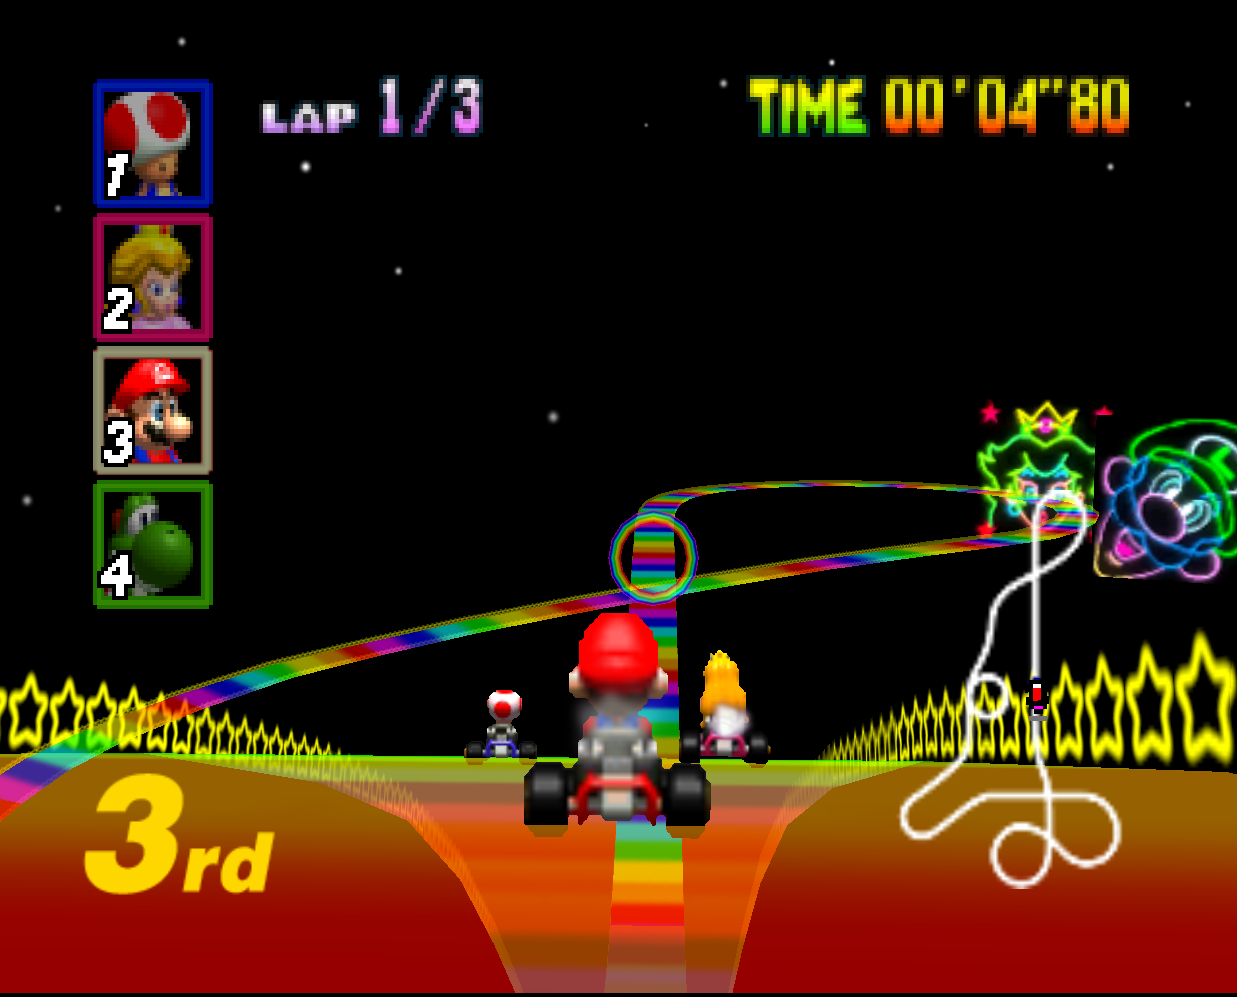 Screenshot from the Rainbow Road stage of Mario Kart 64